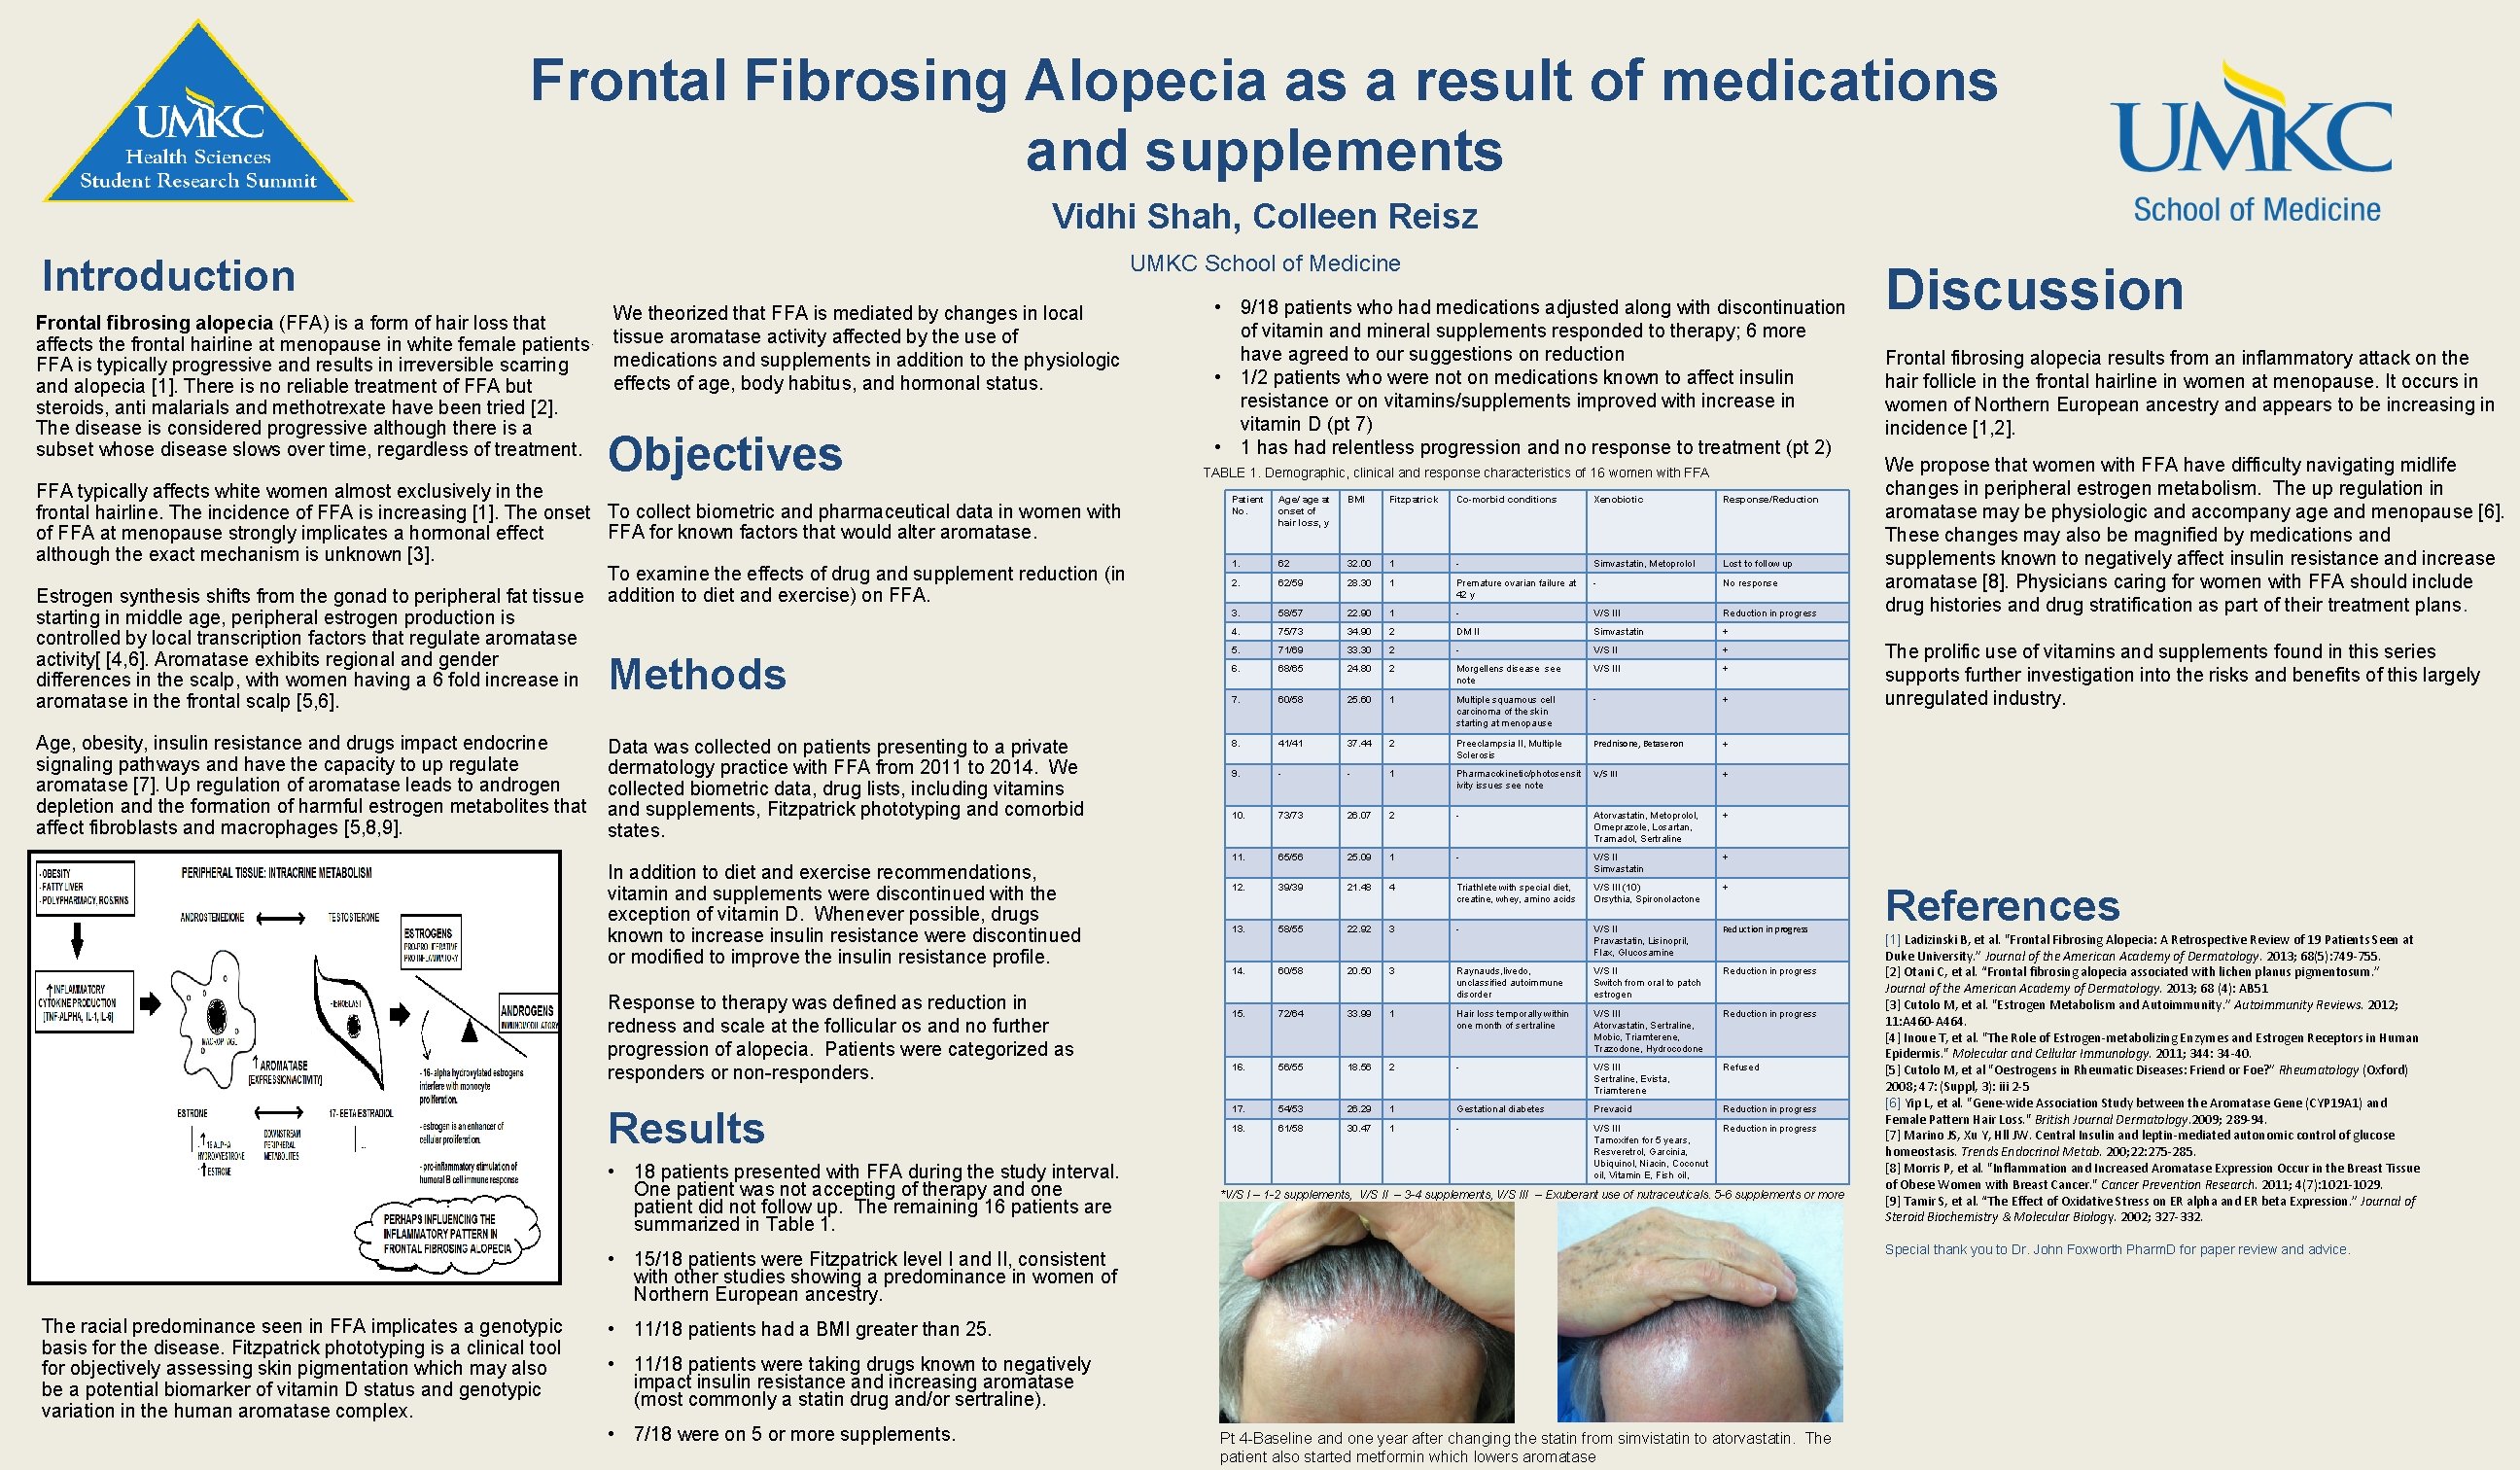 Frontal Fibrosing Alopecia as a result of medications and supplements Vidhi Shah, Colleen Reisz